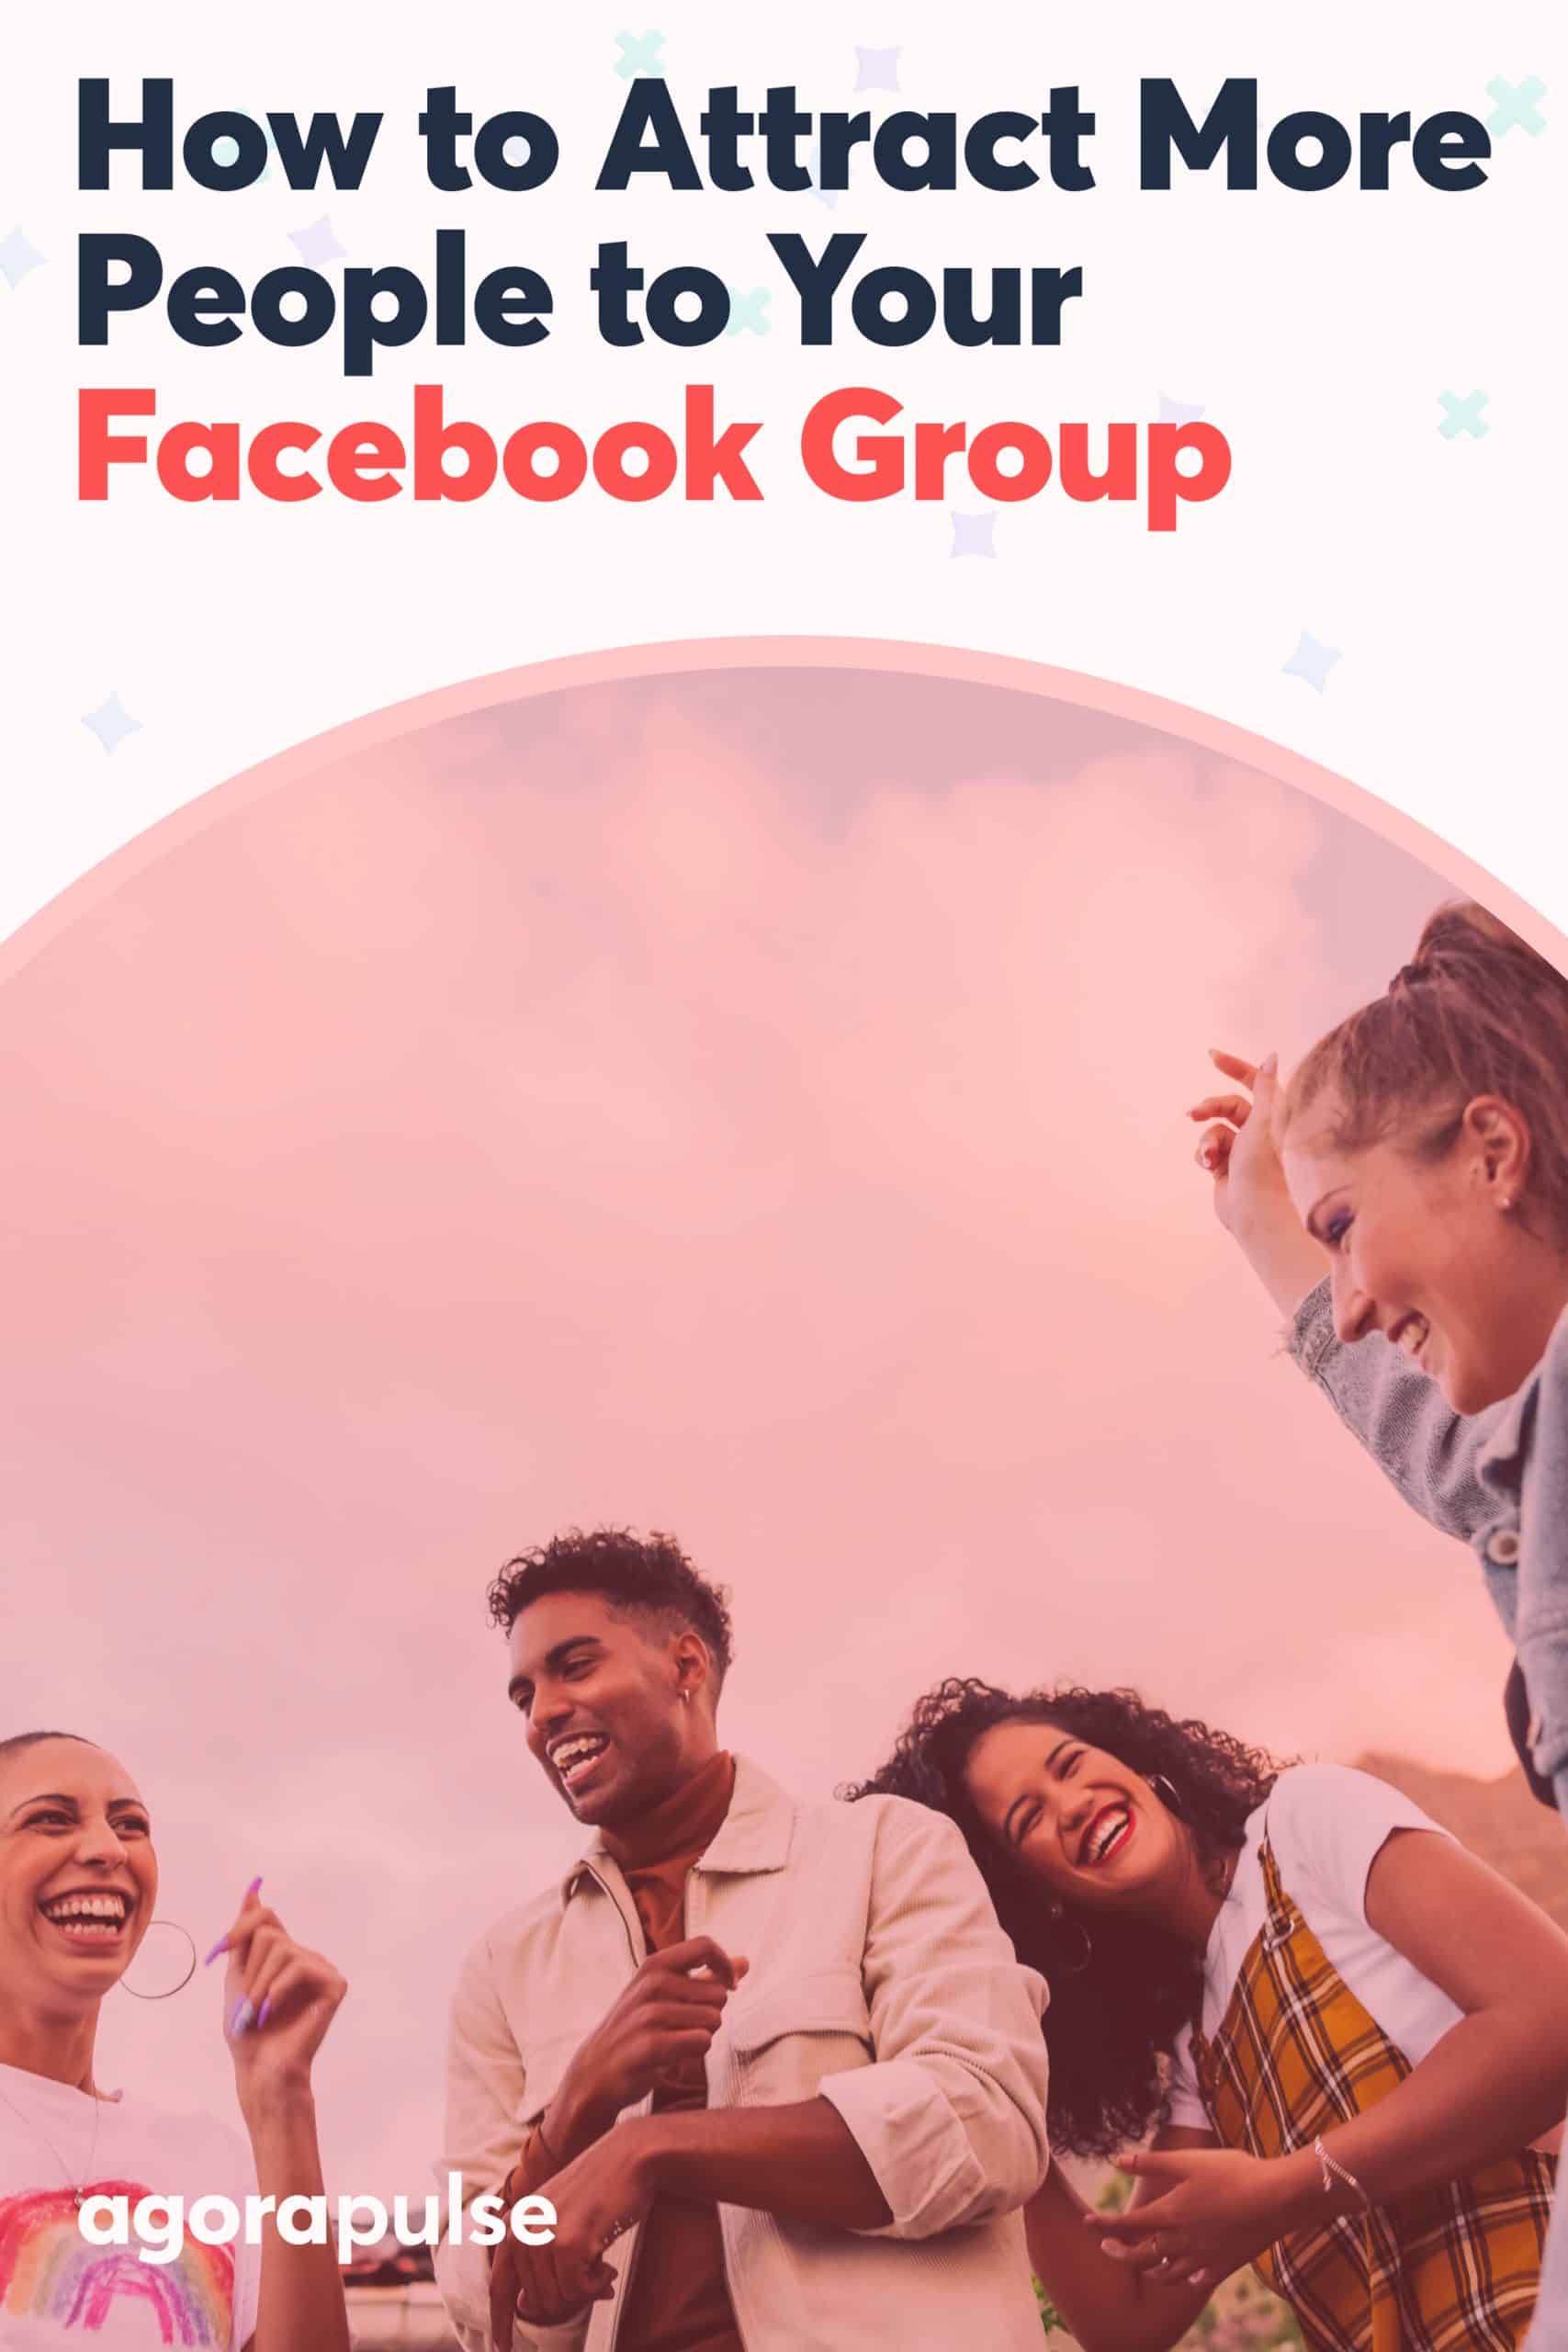 How to Attract More People to Your Facebook Group